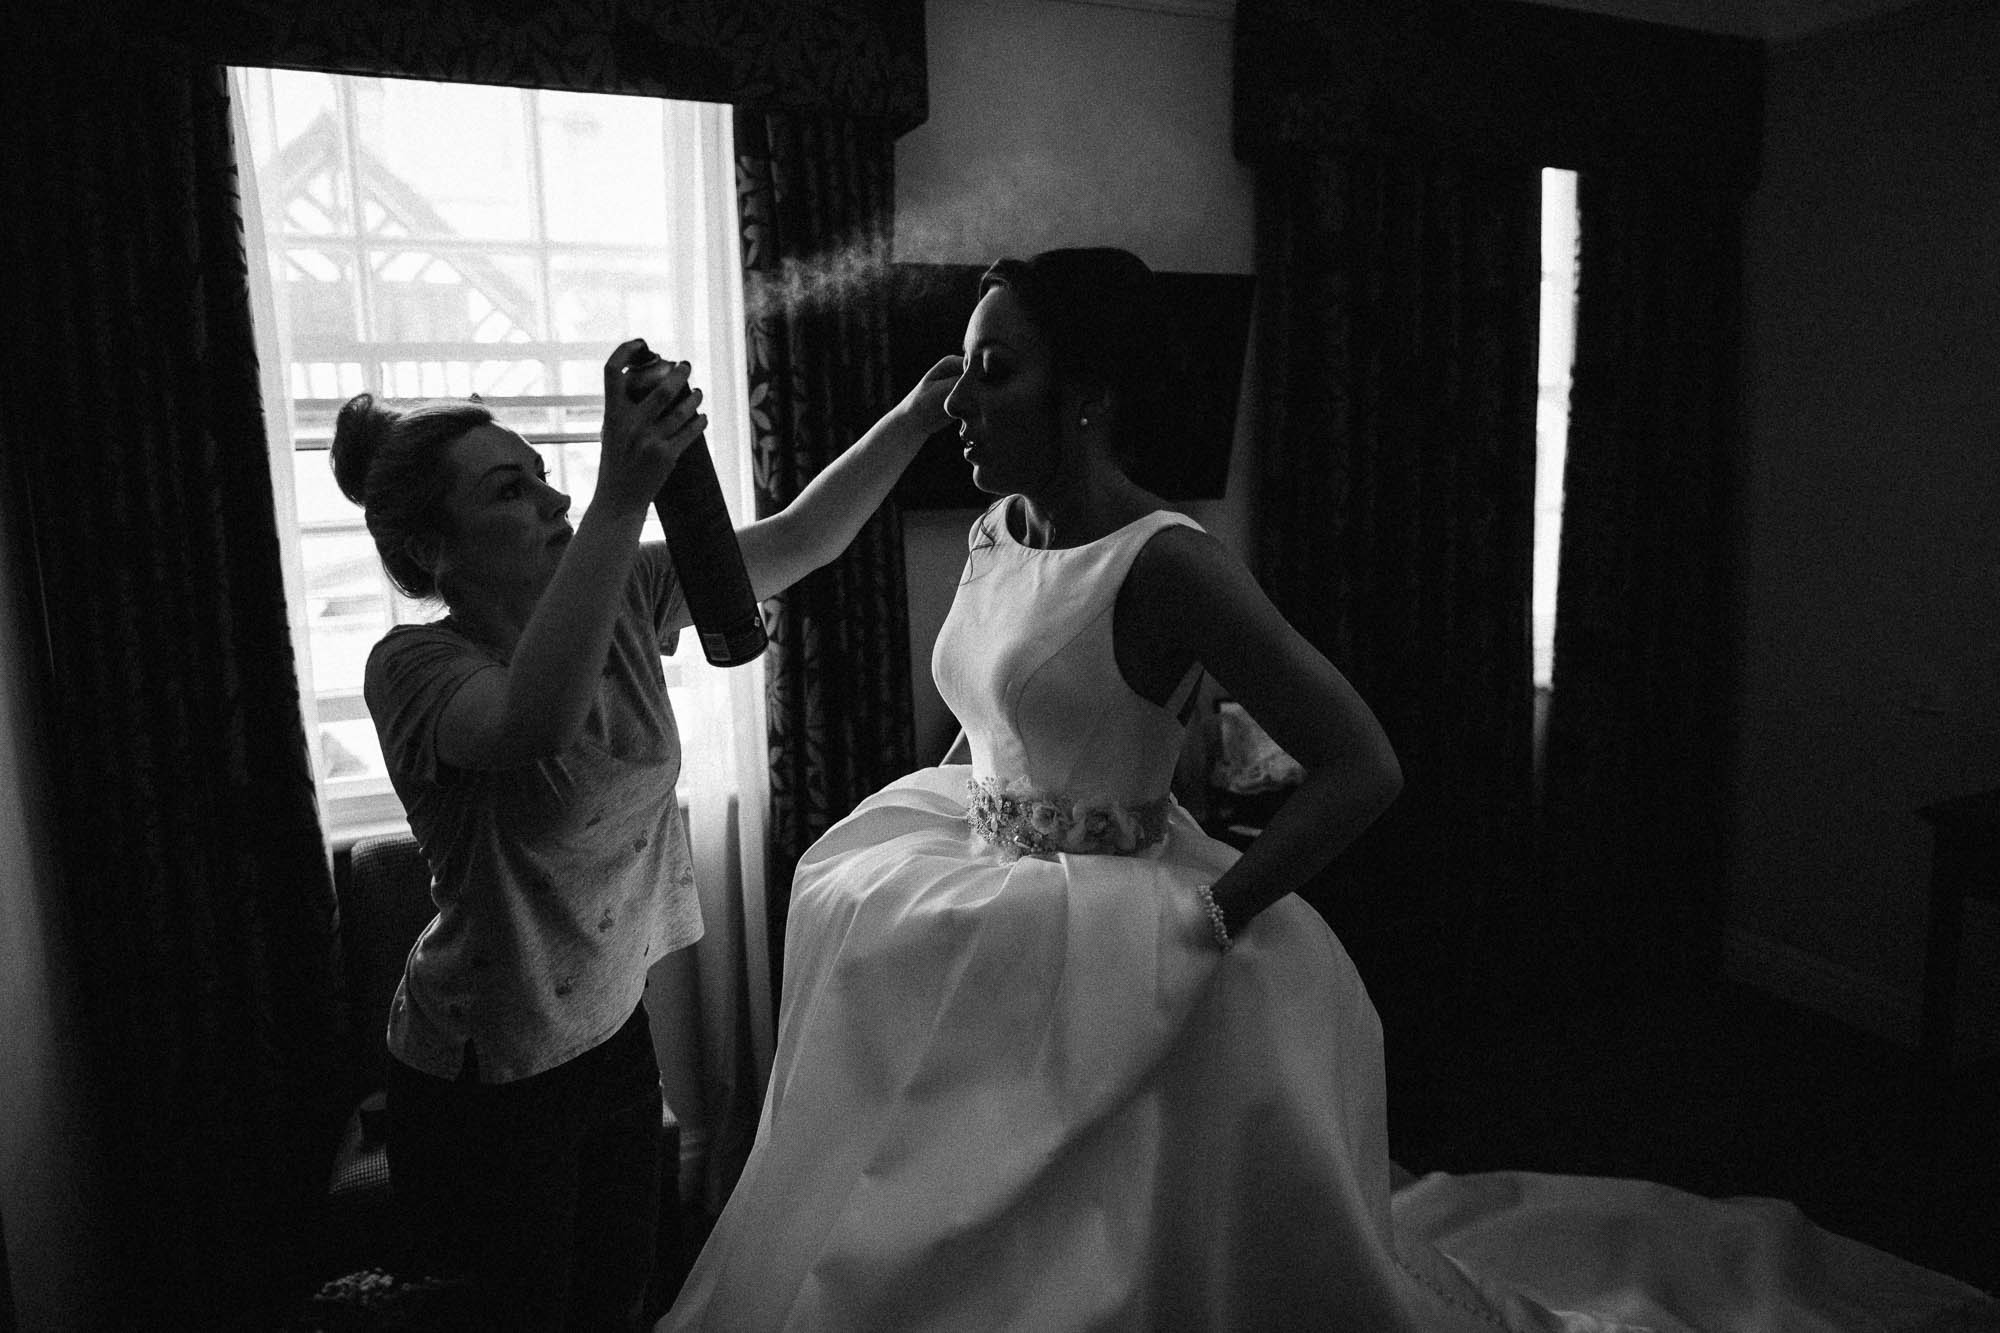 Bride getting ready with wedding dress on and stylist doing finishing touches